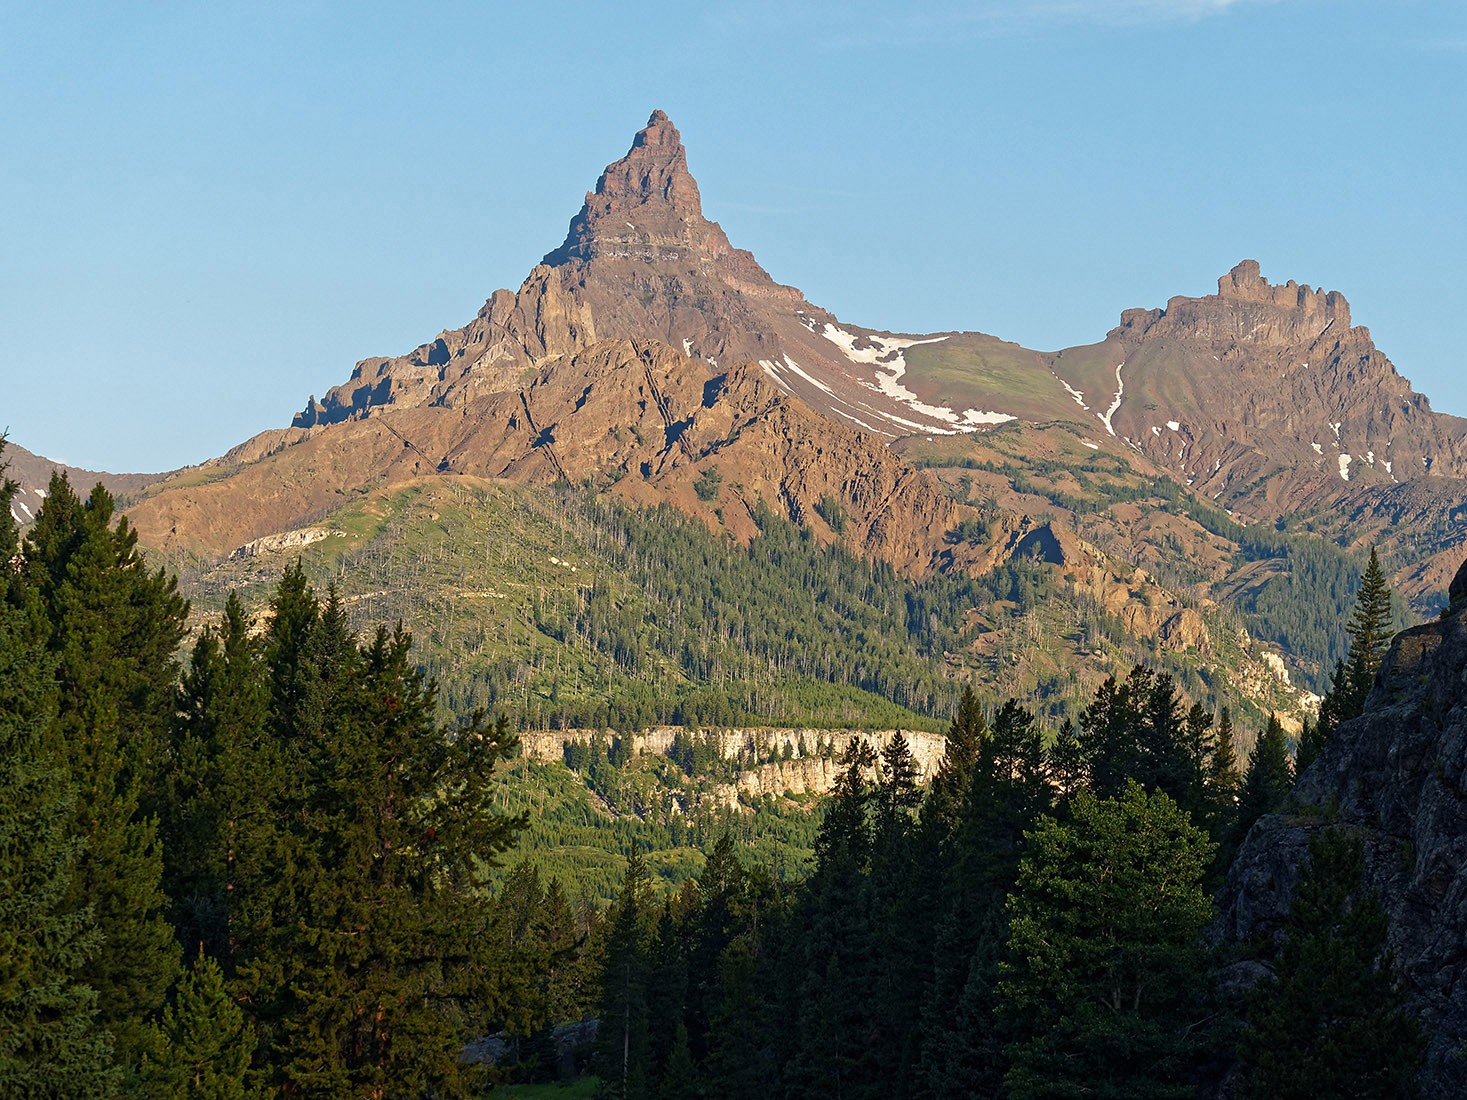 Closer view of Pilot Peak in the center.  Igneouw dikes that resist erosion form vertical bands in the mountain.